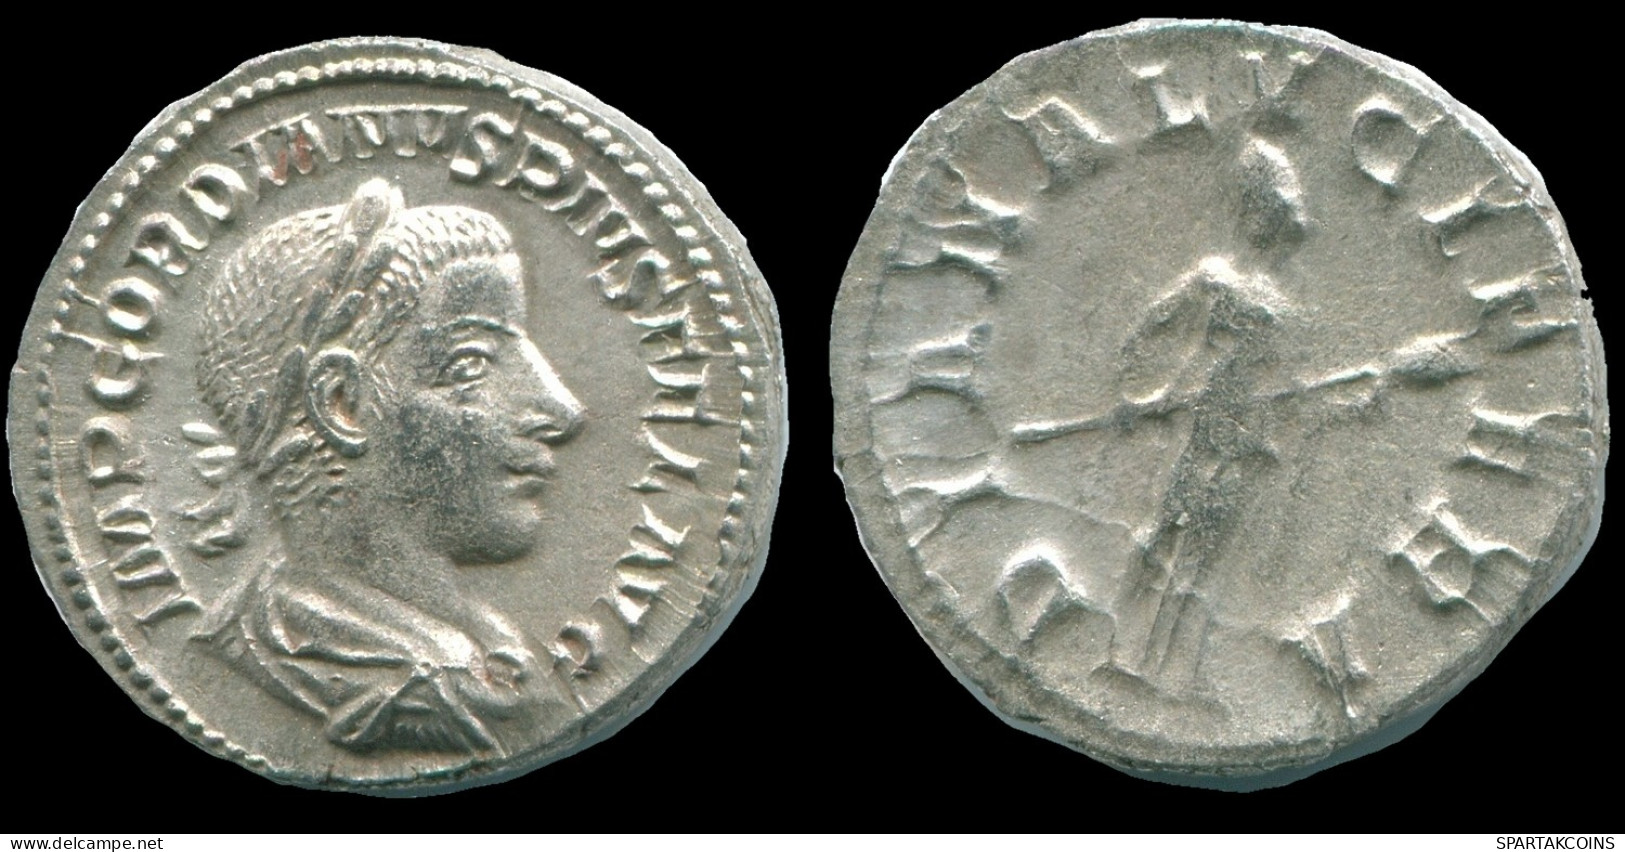 GORDIAN III AR DENARIUS ROME (7TH ISSUE. 1ST OFFICINA) DIANA #ANC13049.84.F.A - The Military Crisis (235 AD To 284 AD)